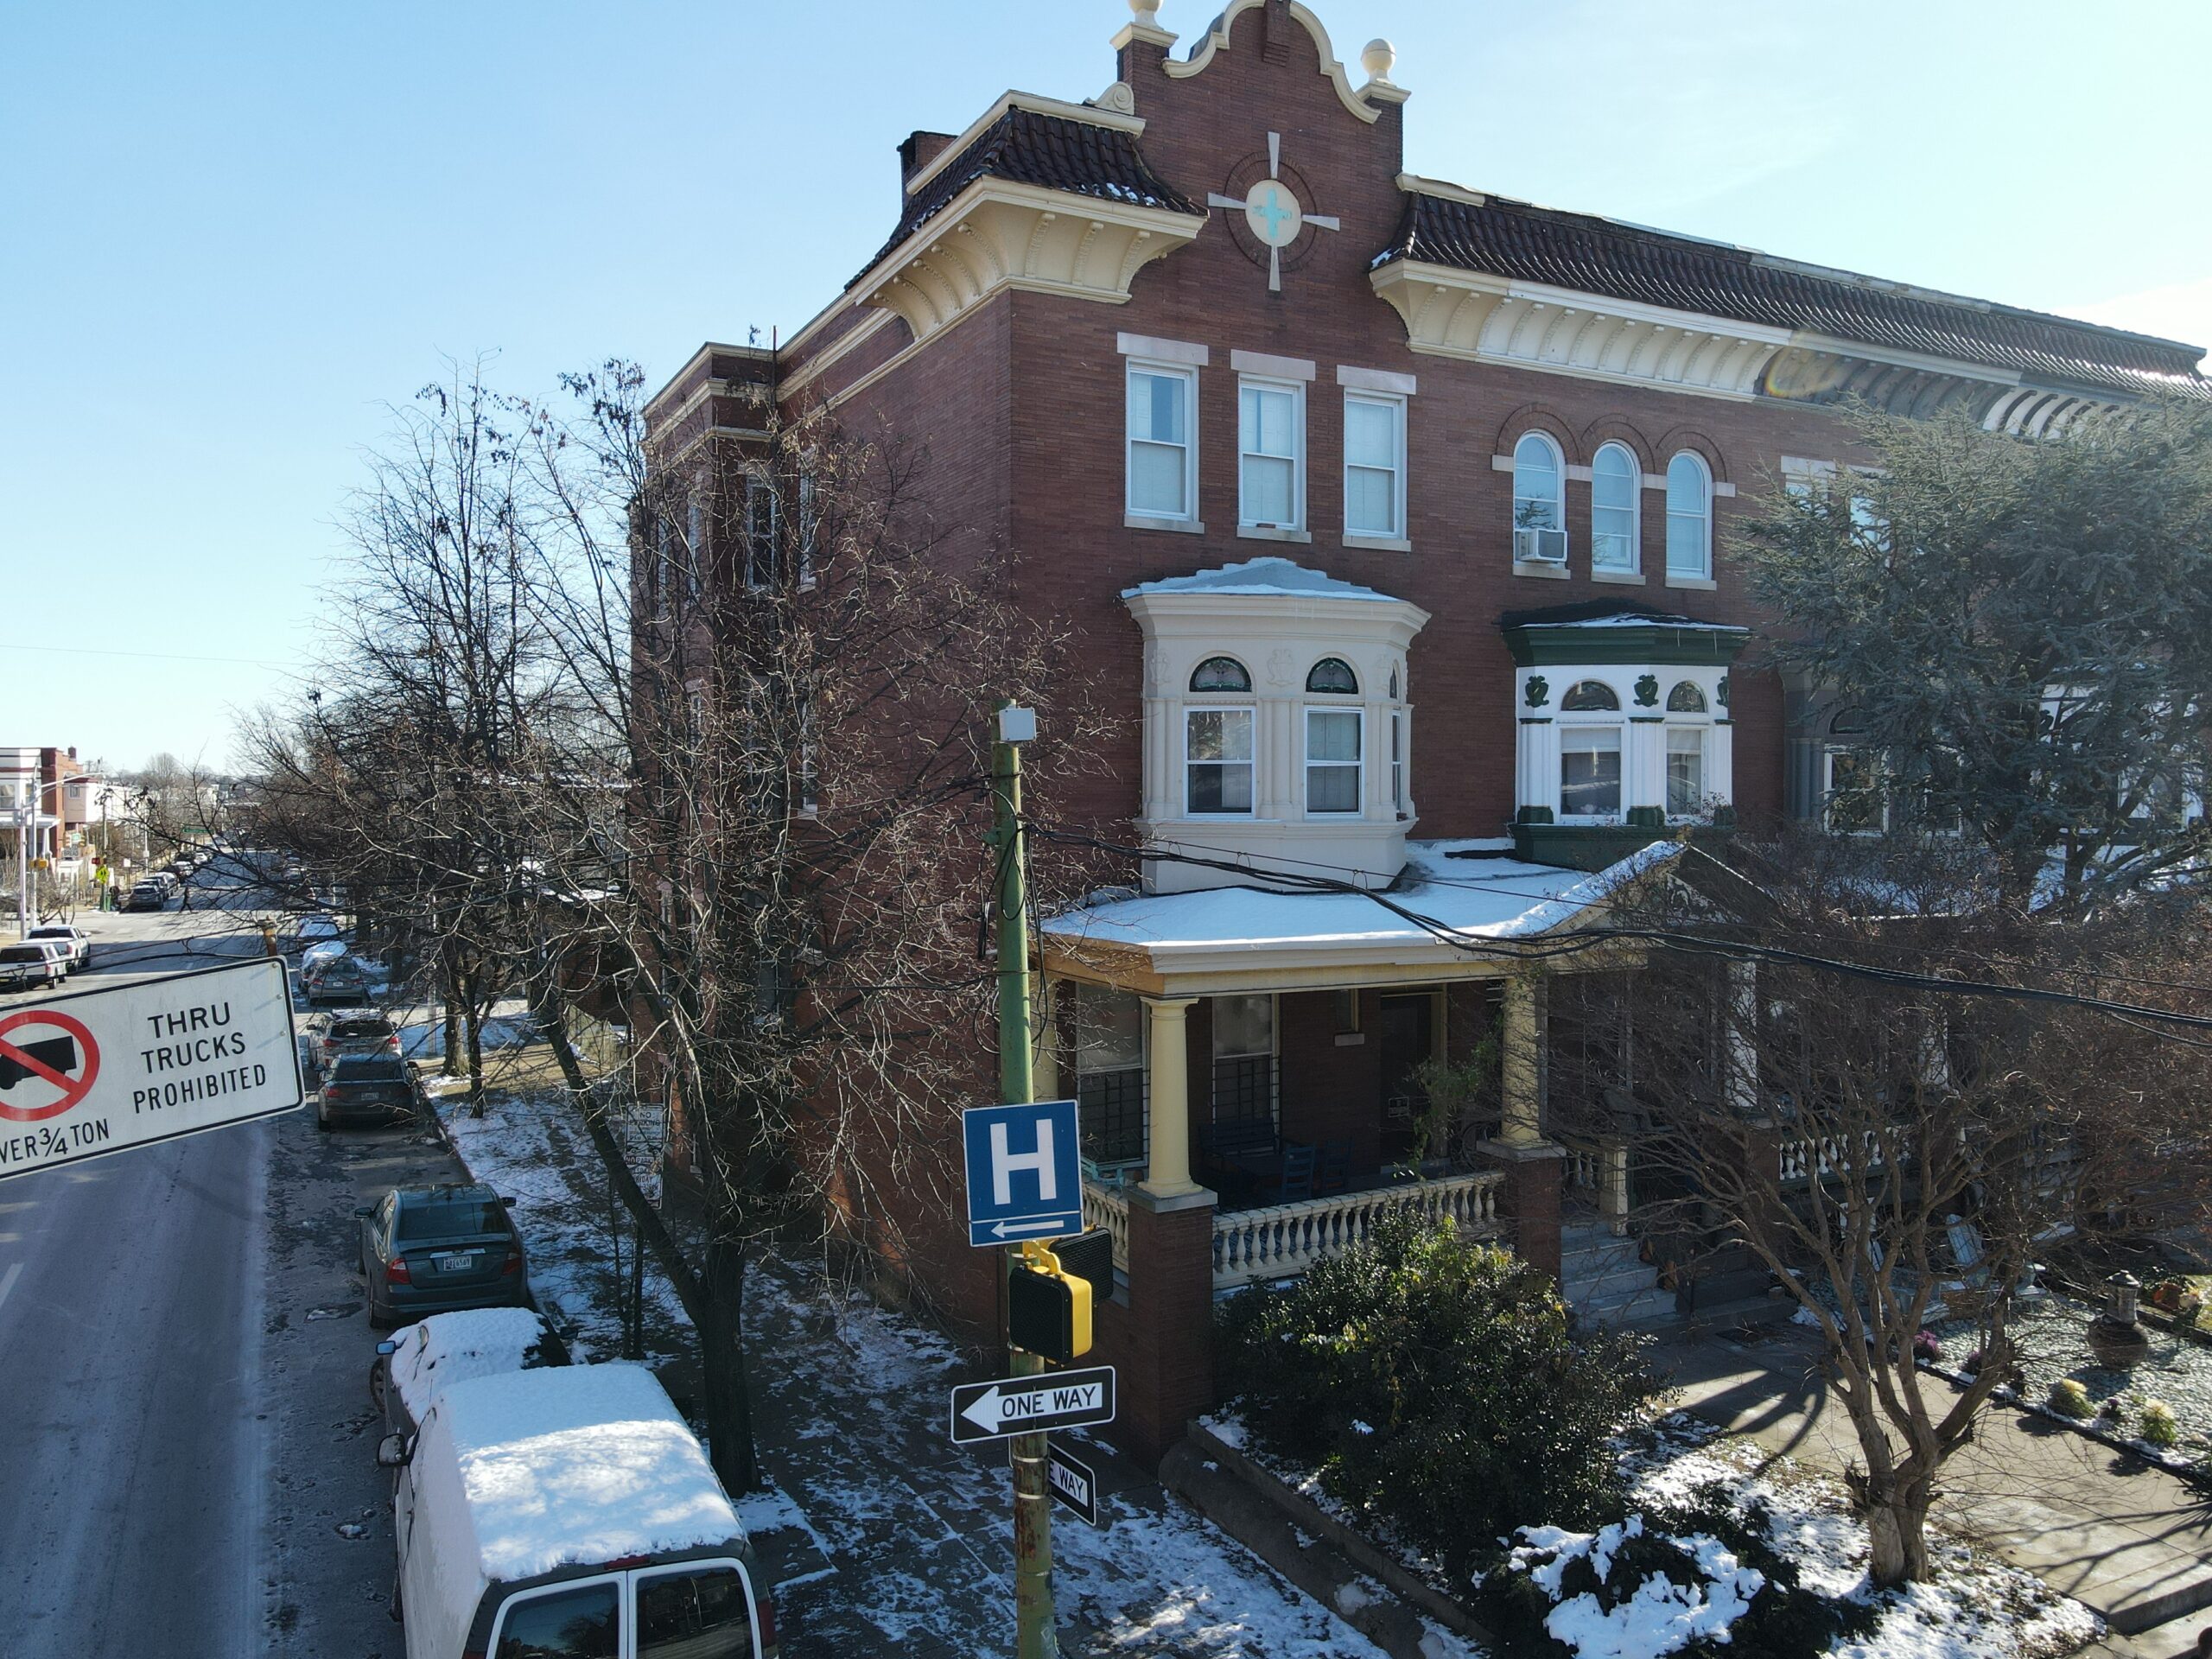 2745 North Calvert Street: 4 Apartments in Charles Village, 4,080 Sq. Ft. End-of-Group